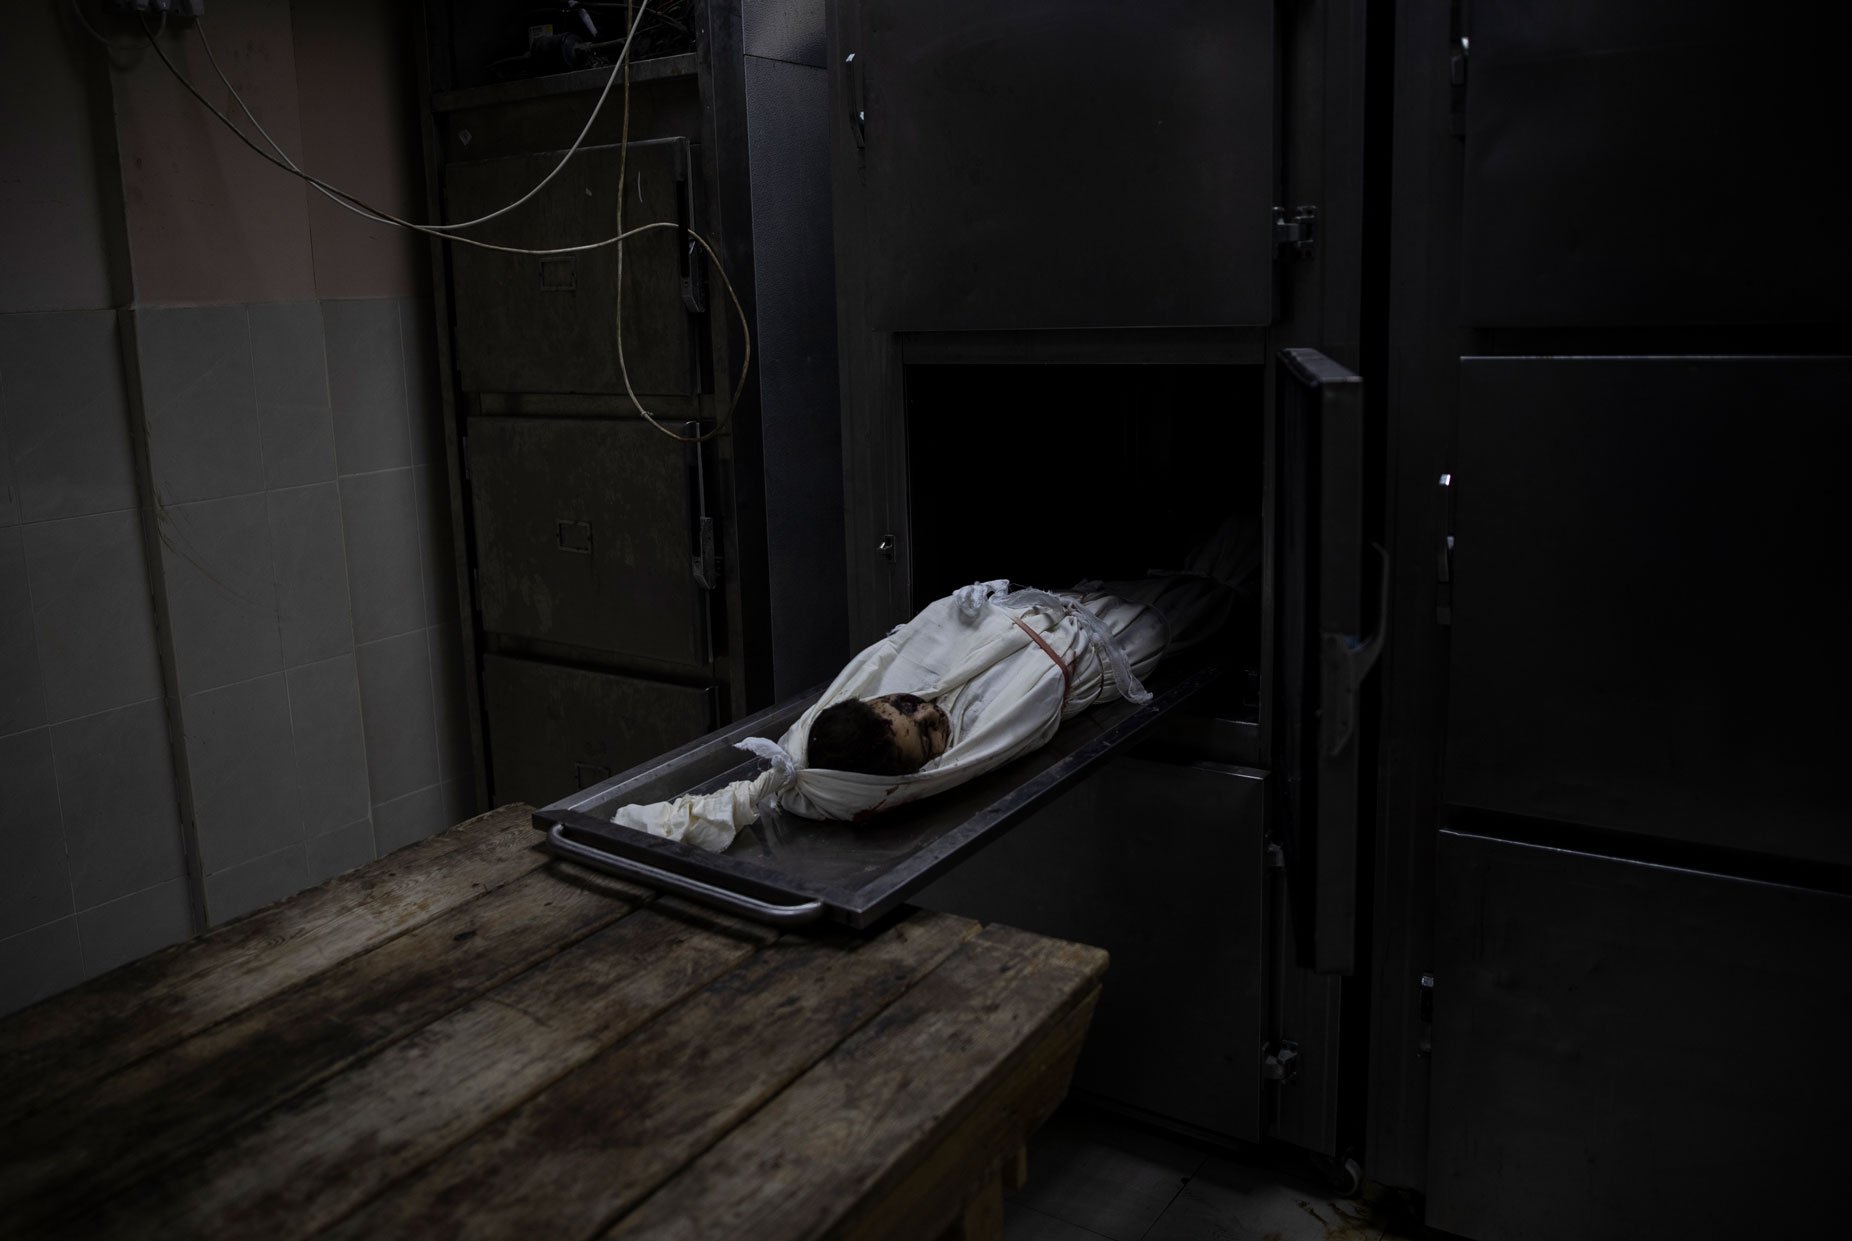  The body of 11-year-old Dima Assaliya, covered with a white cloth, lies in a morgue after she was killed by an Israeli airstrike in town of Jabaliya, northern Gaza Strip, Thursday, May 20, 2021. (AP Photo/Khalil Hamra) 